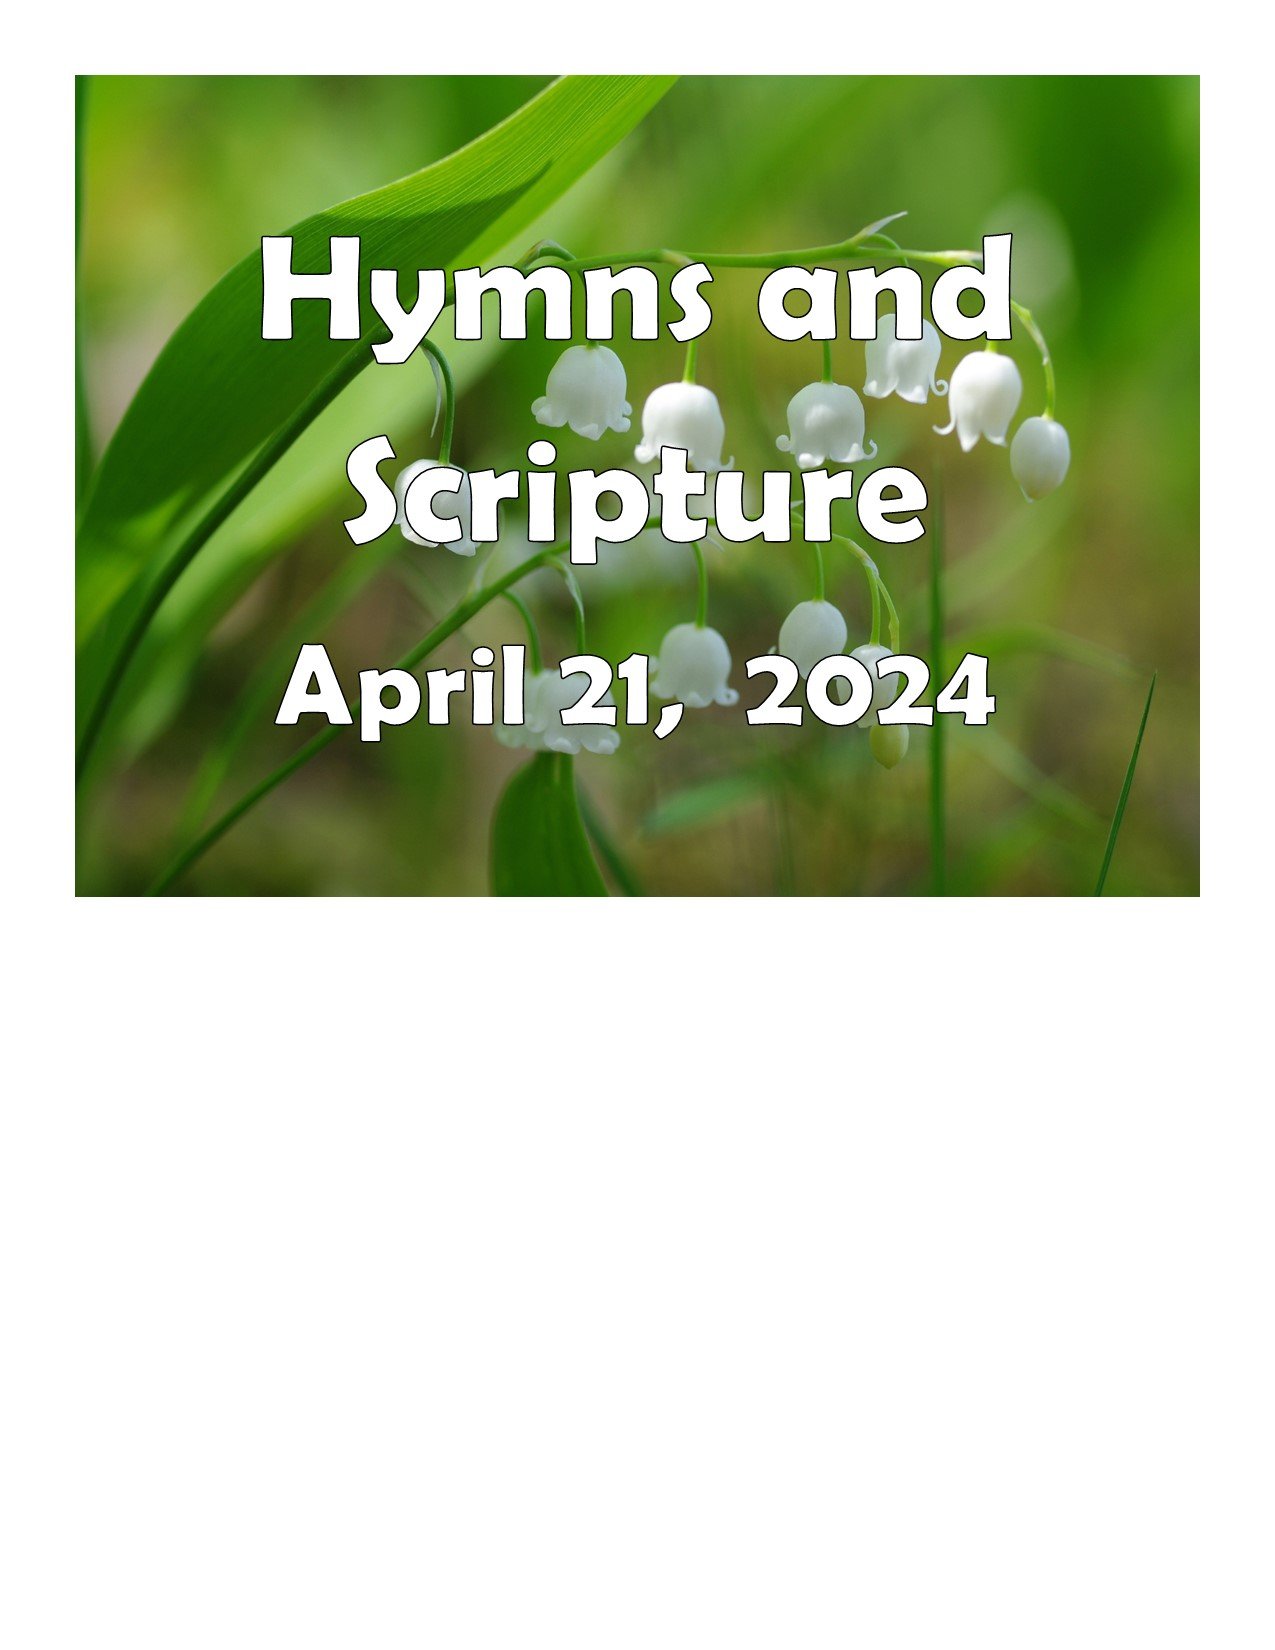 Hymns and Scripture April 21 2024.jpg